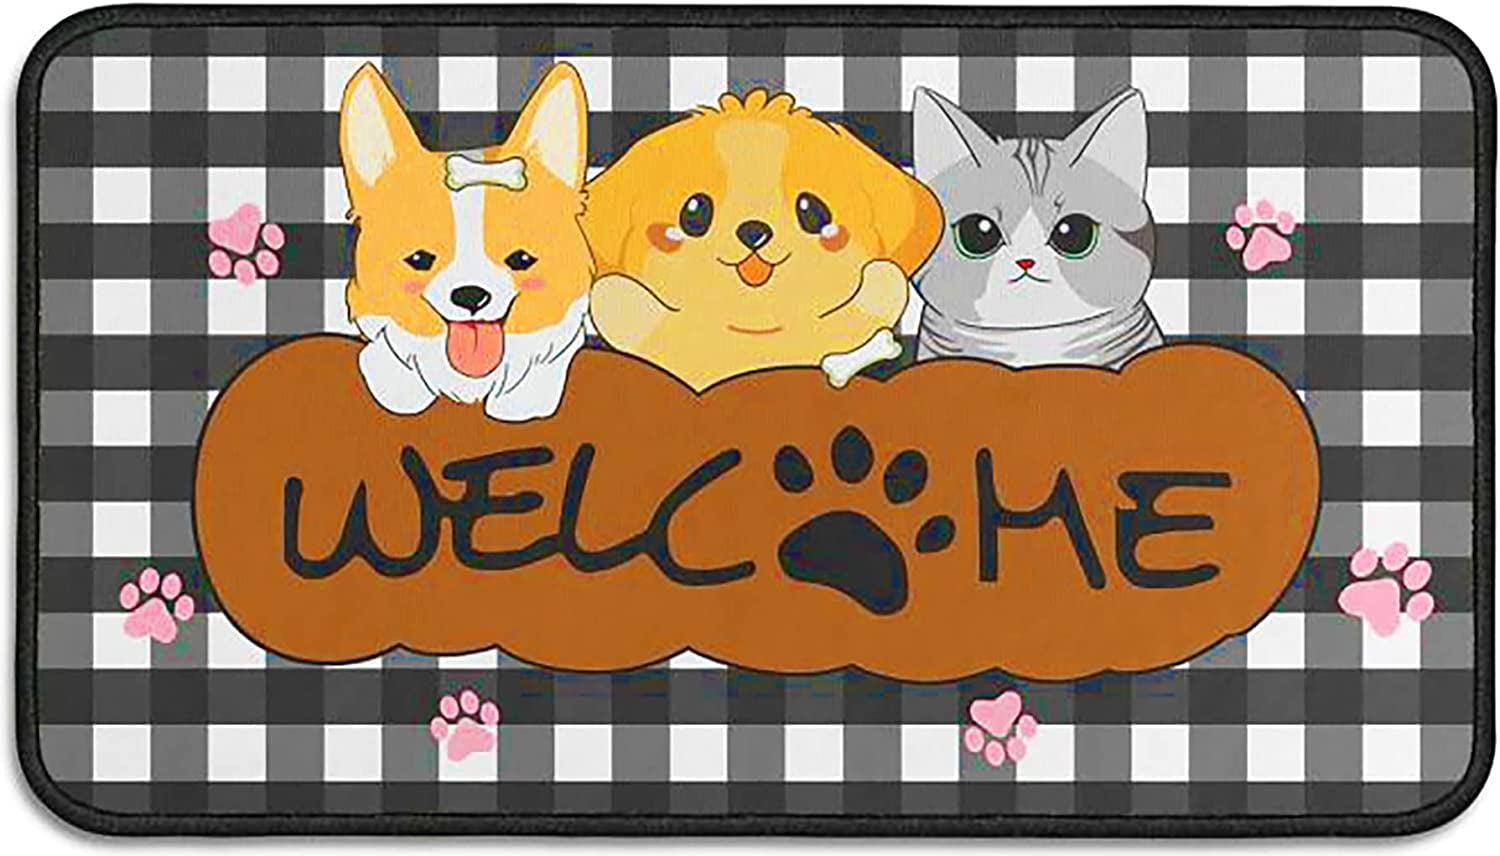 The Kids Won't Move Back Home RV Welcome Mat –